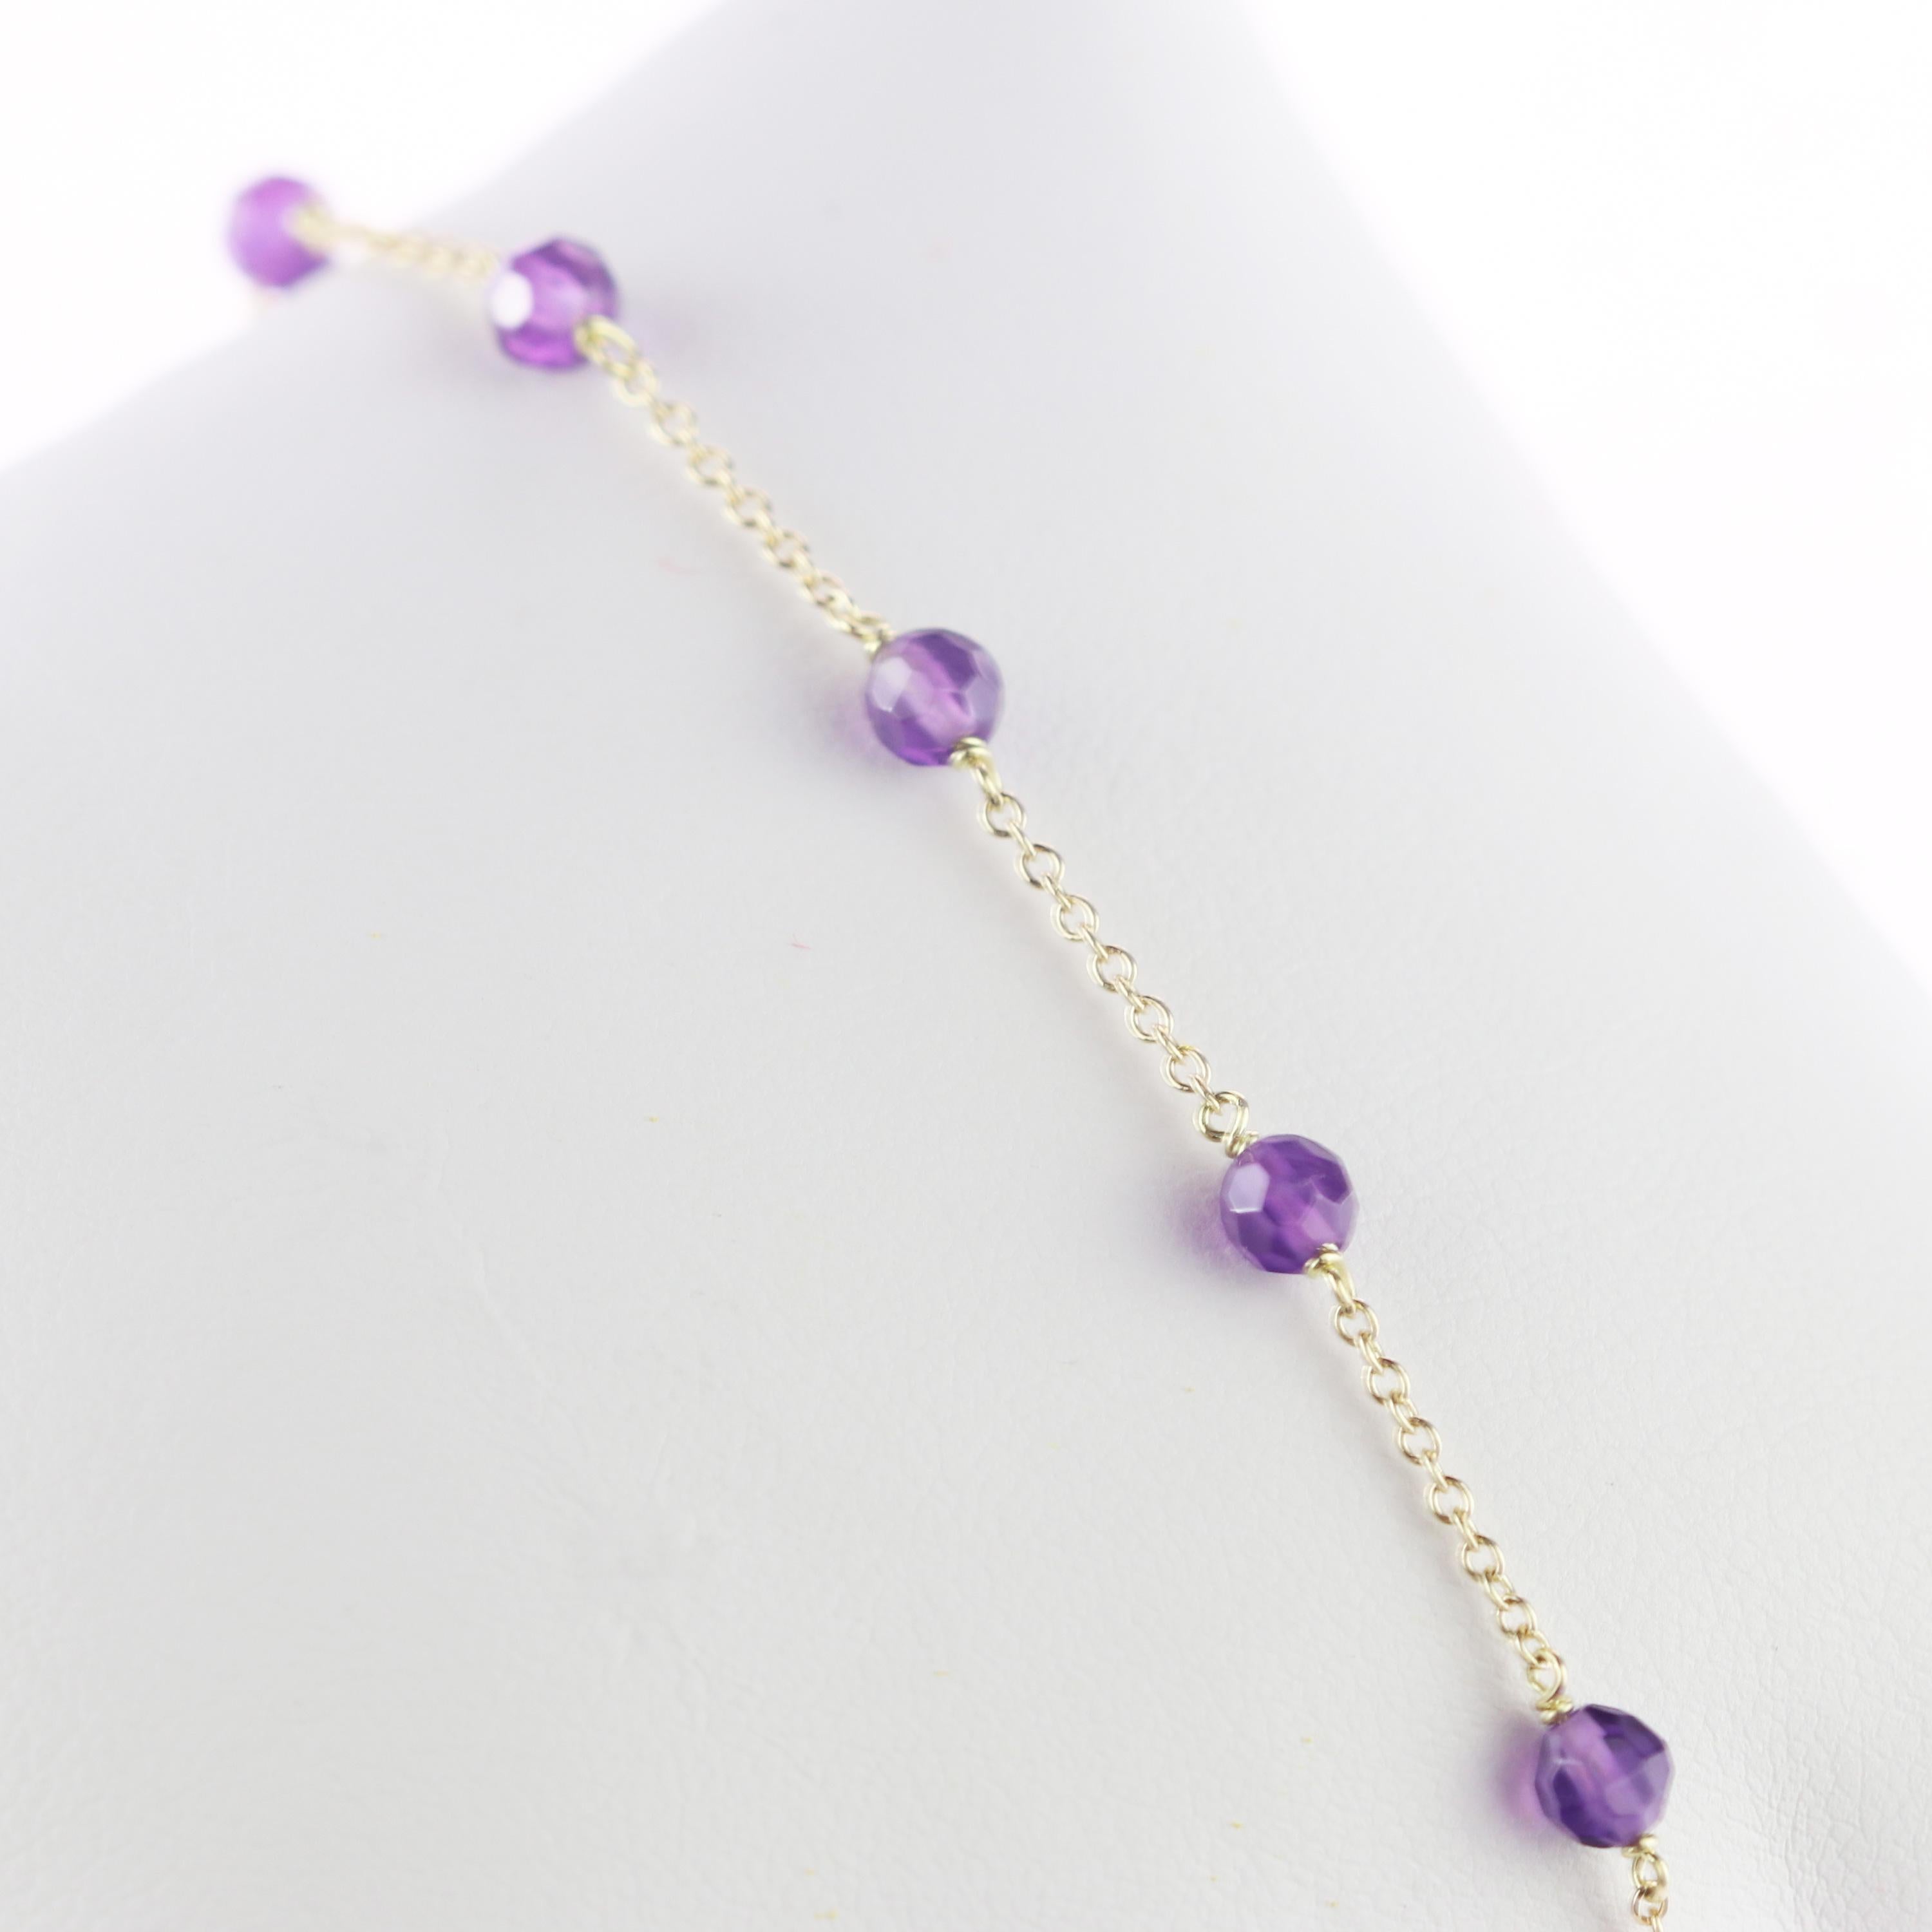 Marvellous bracelet starring natural amethyst beads, for a bright charm of uniqueness. Luminous jewel with natural precious jewellery on elegant  Gold Plate setting.

Amethyst is marked as the stone for the month of February. Amethyst is the stone